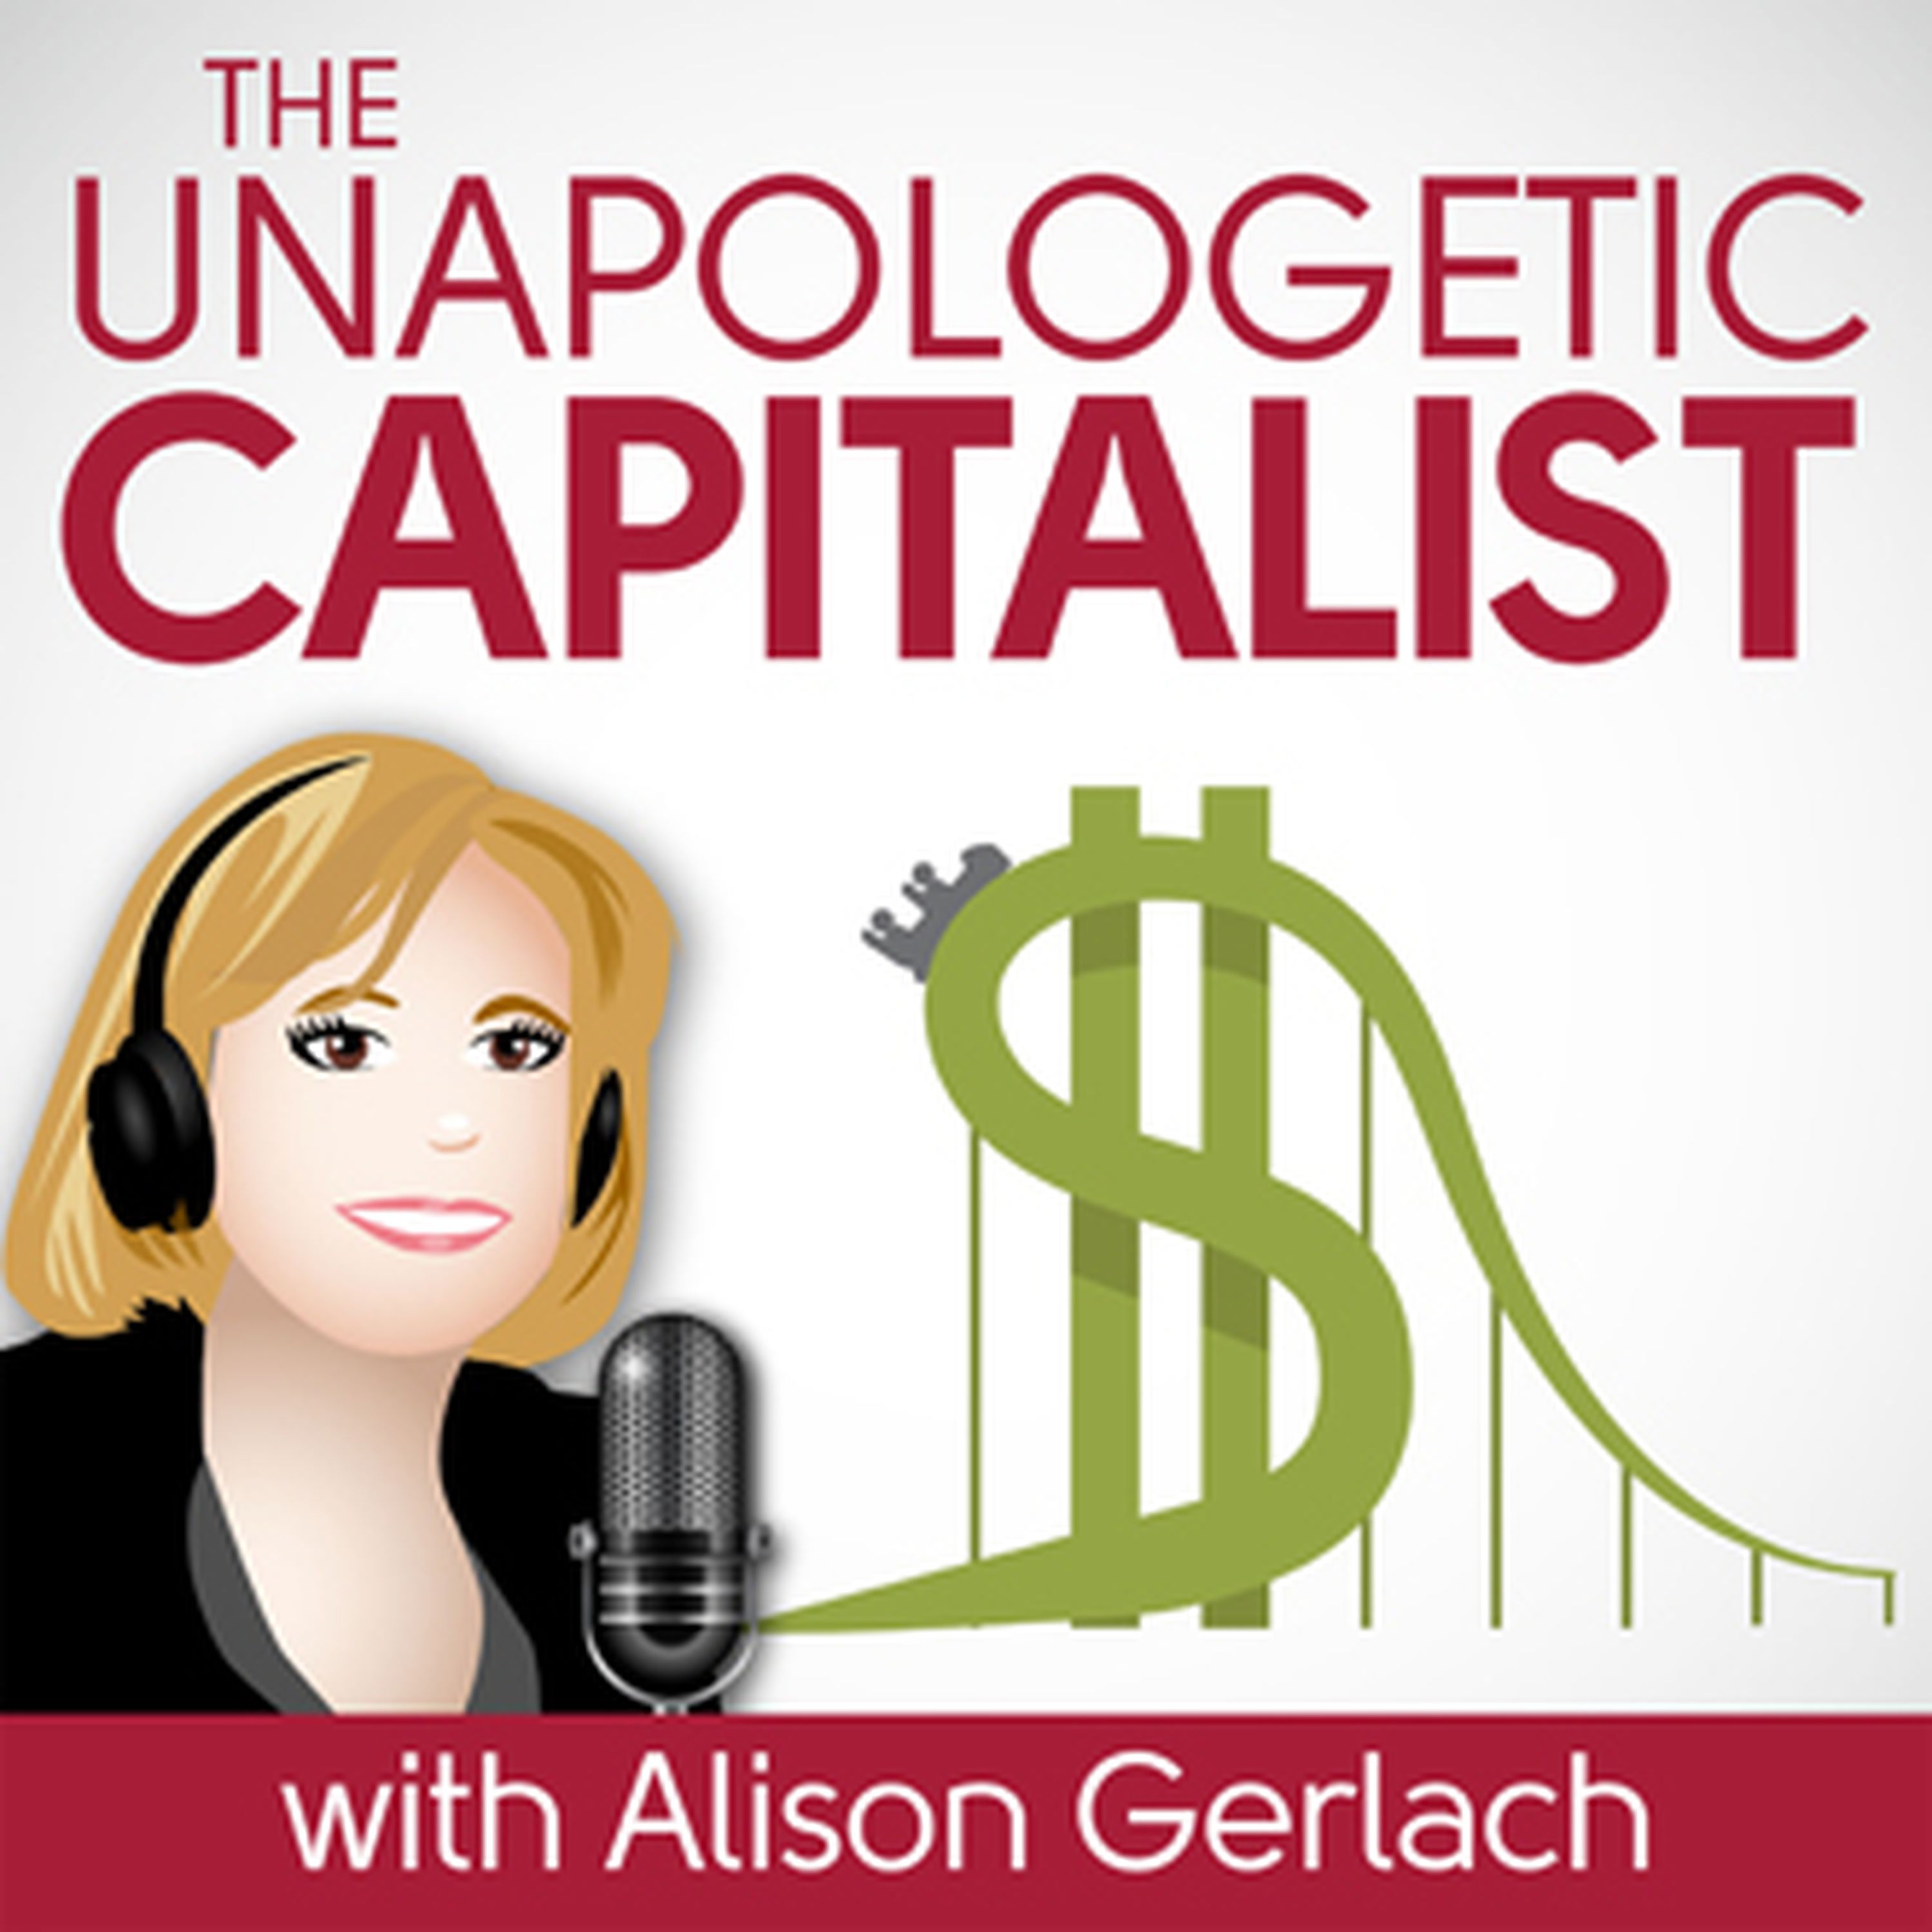 The Exchange - Ep. 10 - Alison Gerlach of the Unapologetic Capitalist